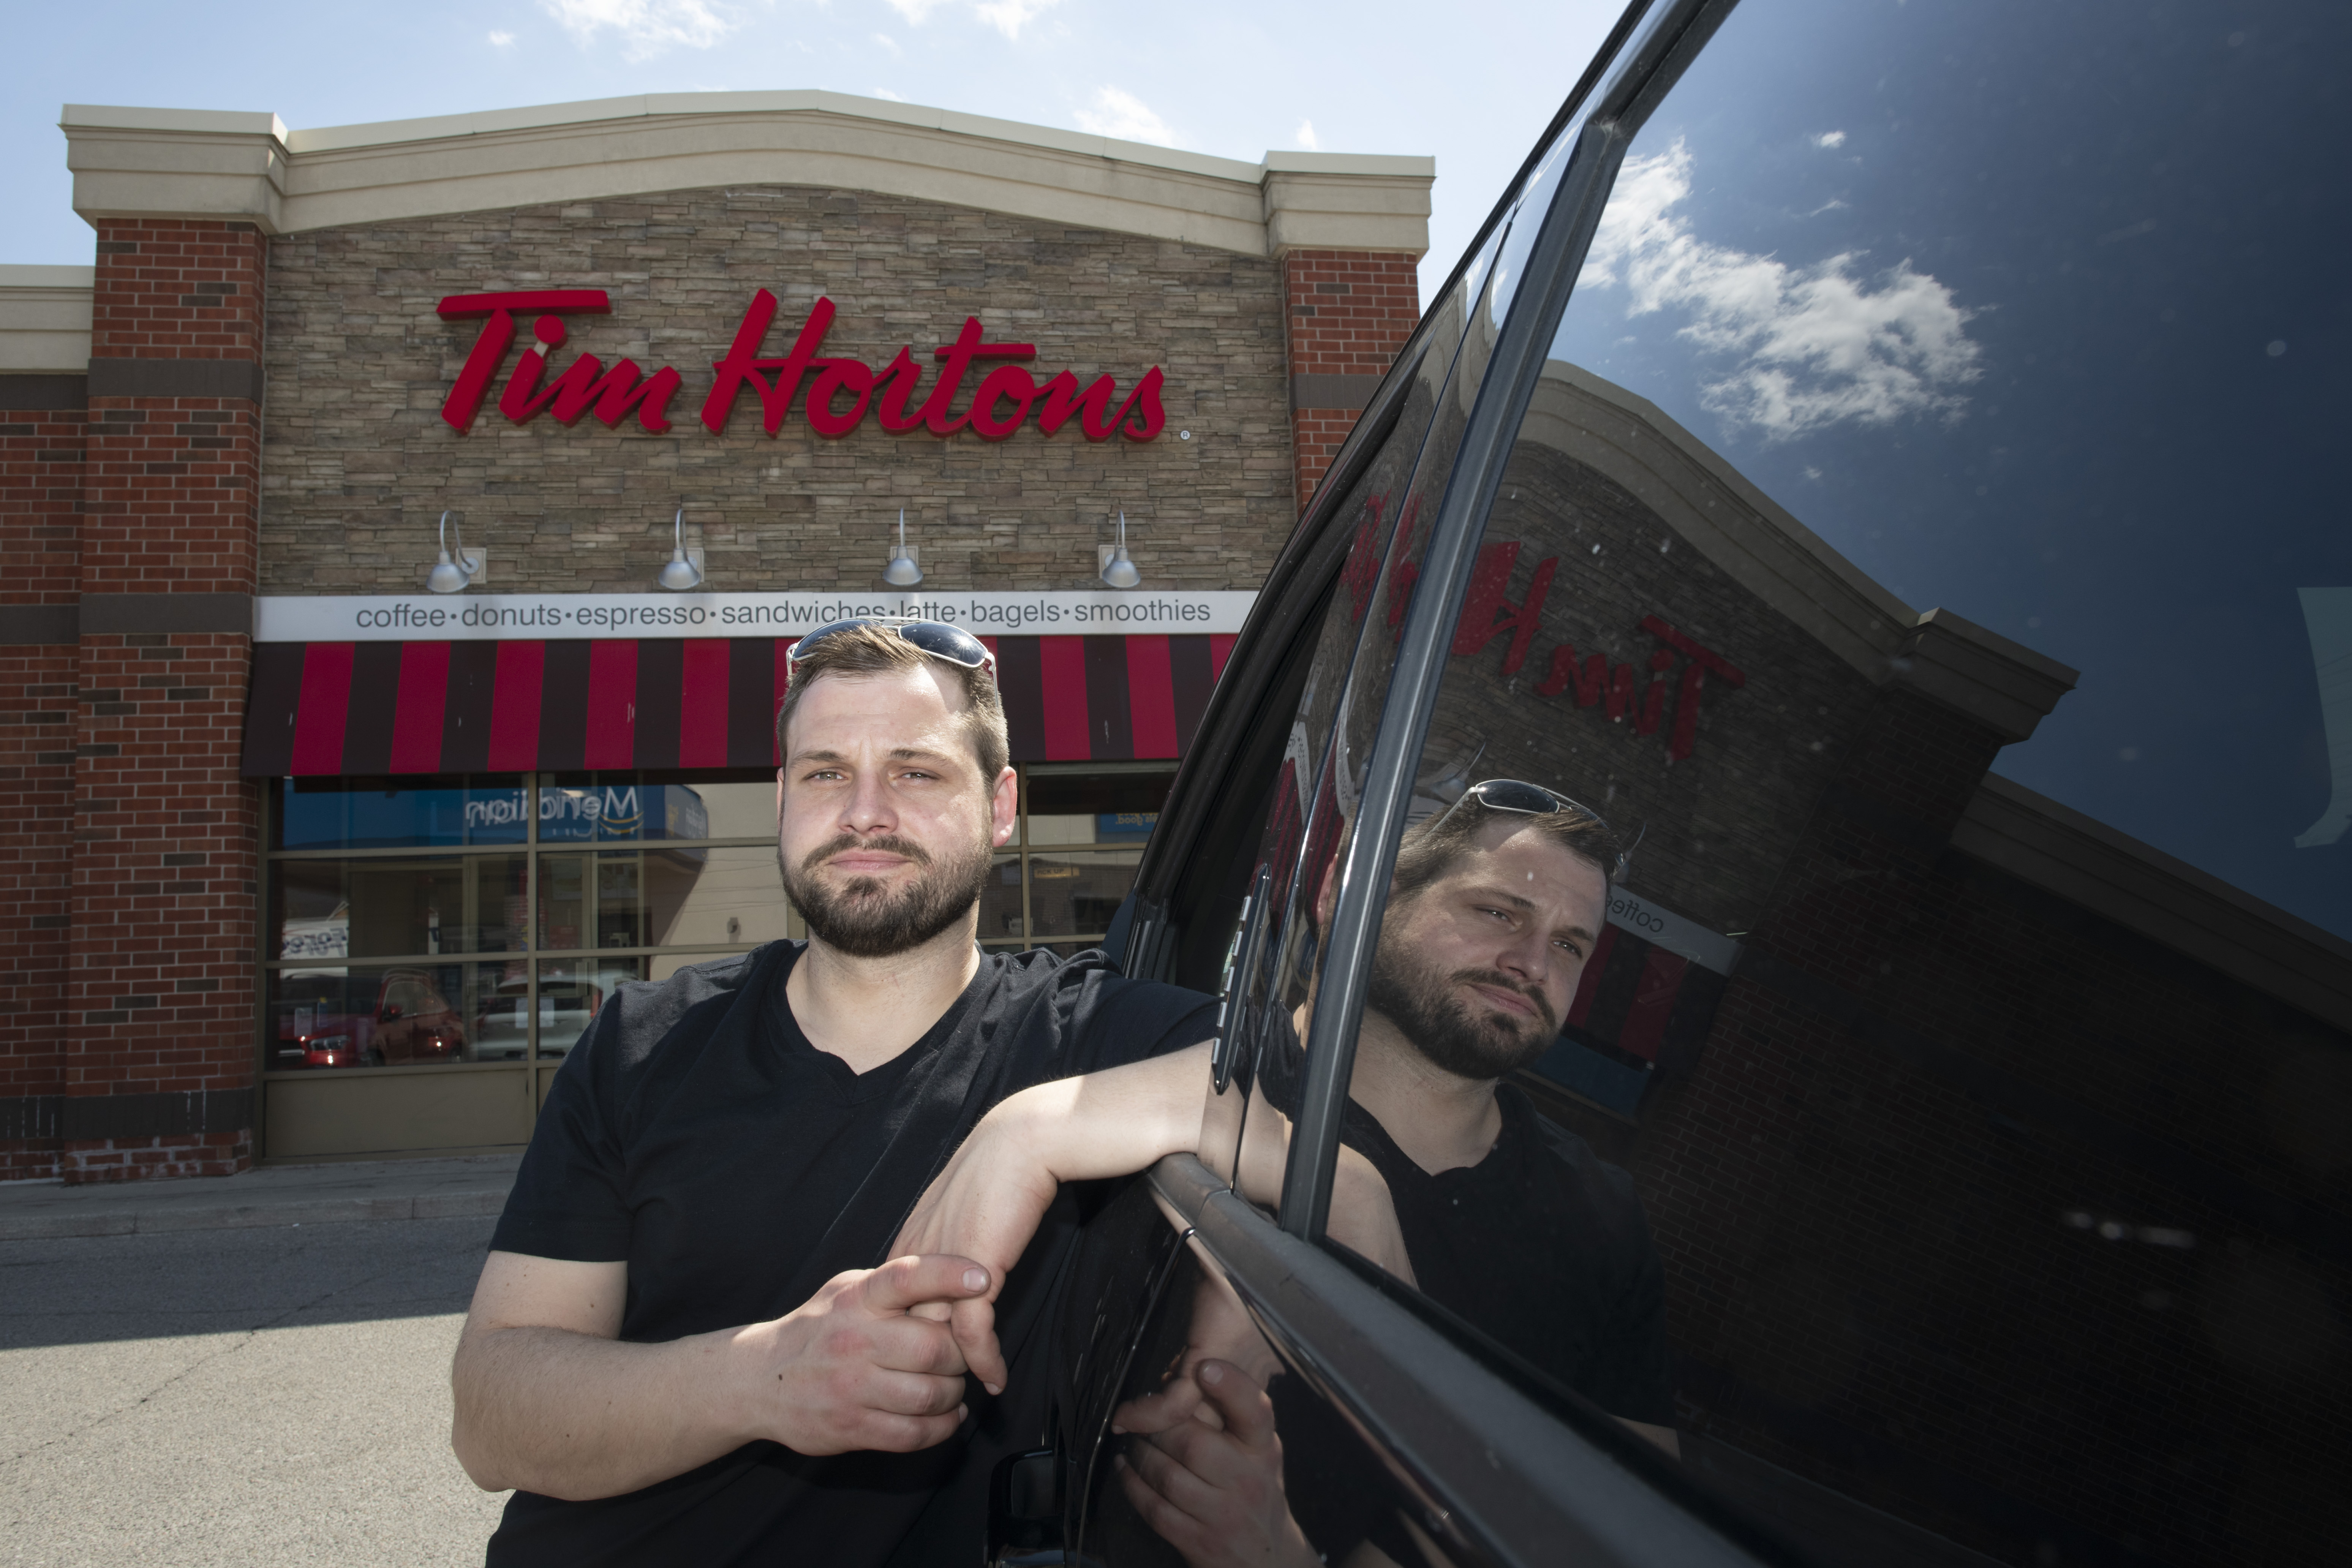 Tim Hortons Revealed The Canadian Cities That Liked Its Products